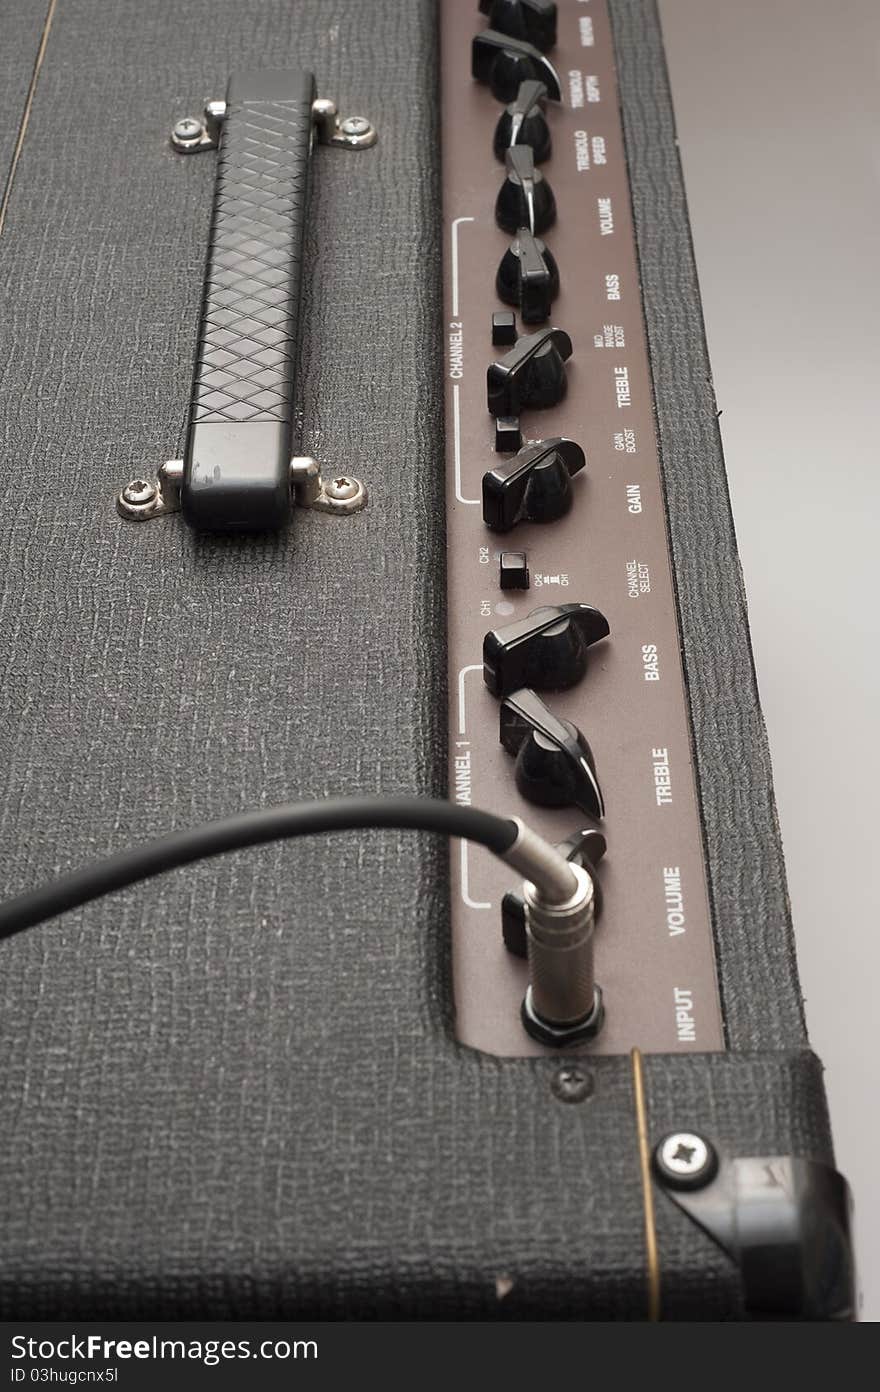 Close-up detail showing the chicken head knobs and controls of a classic British vintage valve guitar amplifier. The guitar jack input cable is visible in the foreground, as are various patches of superficial wear and tear damage to the tolex cover material on the amplifier. Close-up detail showing the chicken head knobs and controls of a classic British vintage valve guitar amplifier. The guitar jack input cable is visible in the foreground, as are various patches of superficial wear and tear damage to the tolex cover material on the amplifier.